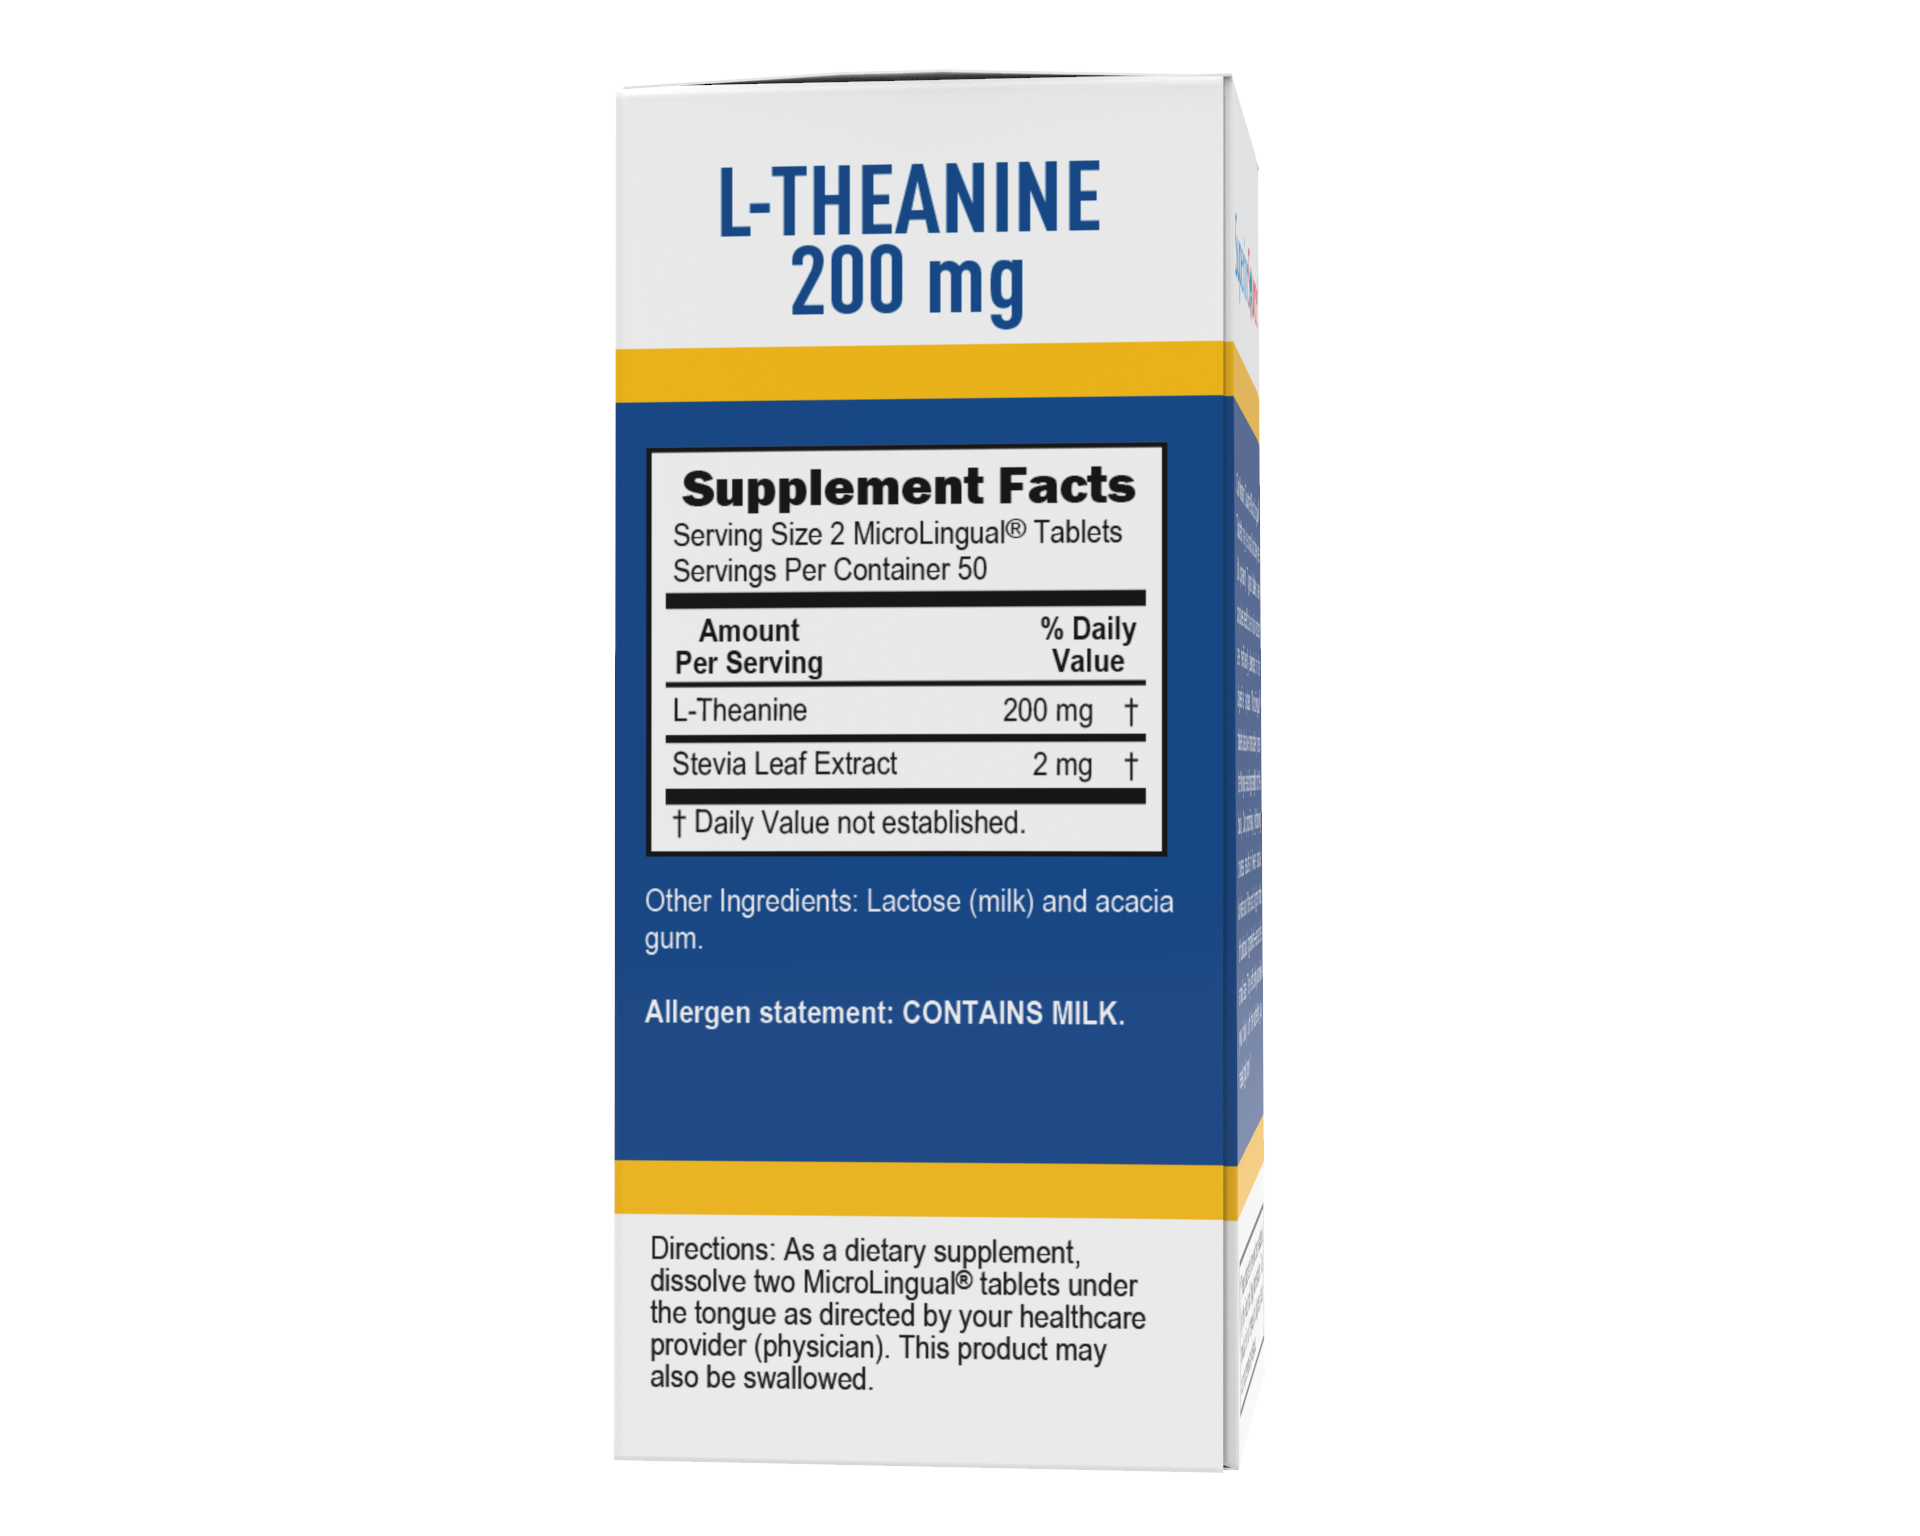 Superior Source L-Theanine 200 mg MicroLingual® Instant Dissolve Tablets - High-quality Sleep Aid by Superior Source at 